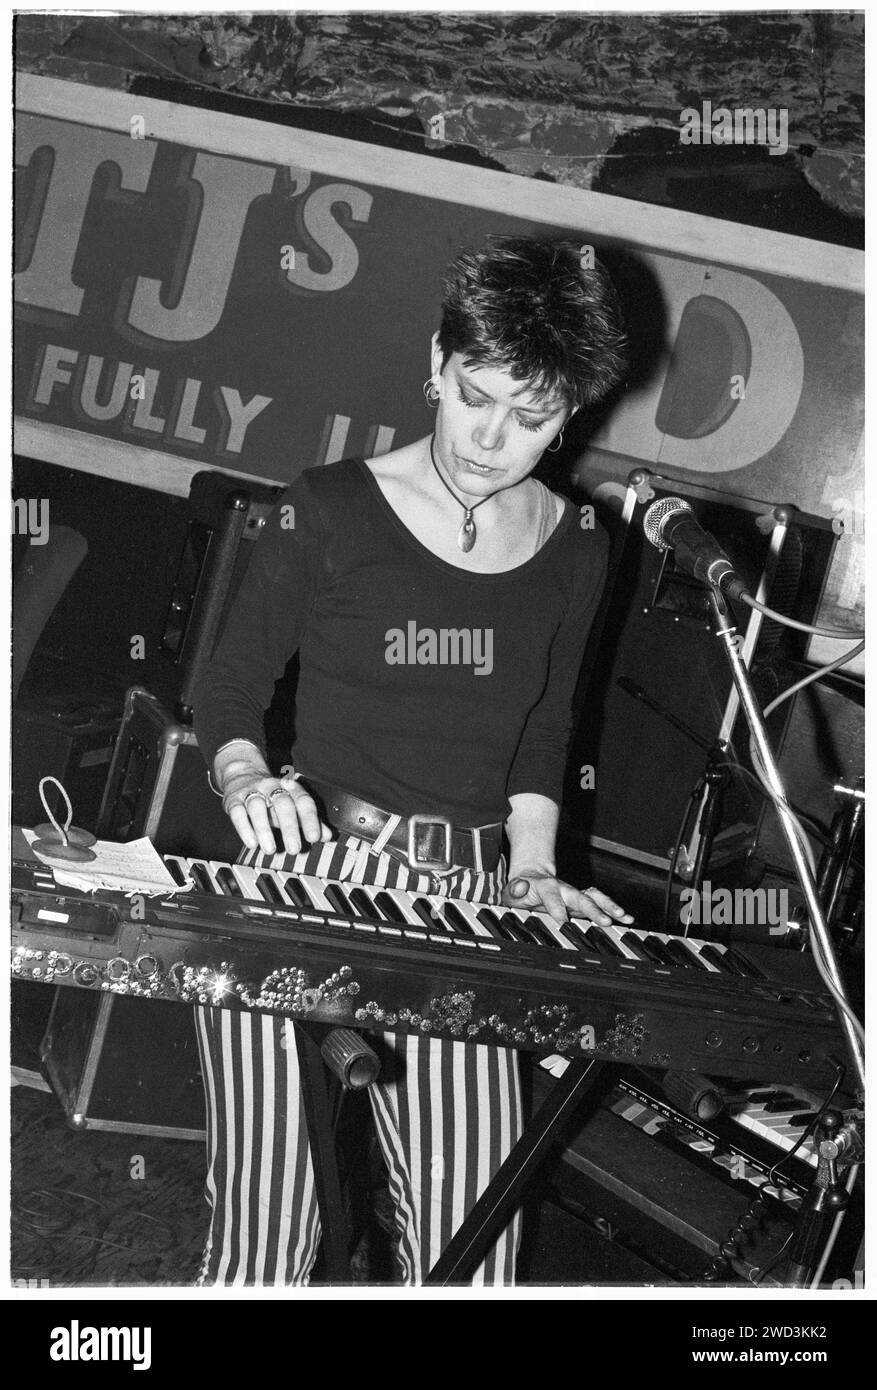 CATATONIA, CONCERT, 1994: Clancy Pegg original keyboard player of Catatonia at a very early gig playing live at the Legendary TJ’s in Newport, Wales, UK on 9 April 1994. Photo: Rob Watkins. INFO: Catatonia, a Welsh alternative rock band in the '90s, fronted by Cerys Matthews, gained fame with hits like 'Mulder and Scully' and 'Road Rage.' Their eclectic sound, blending pop, rock, and folk, solidified their place in the Britpop era, showcasing Matthews' distinctive vocals. Stock Photo